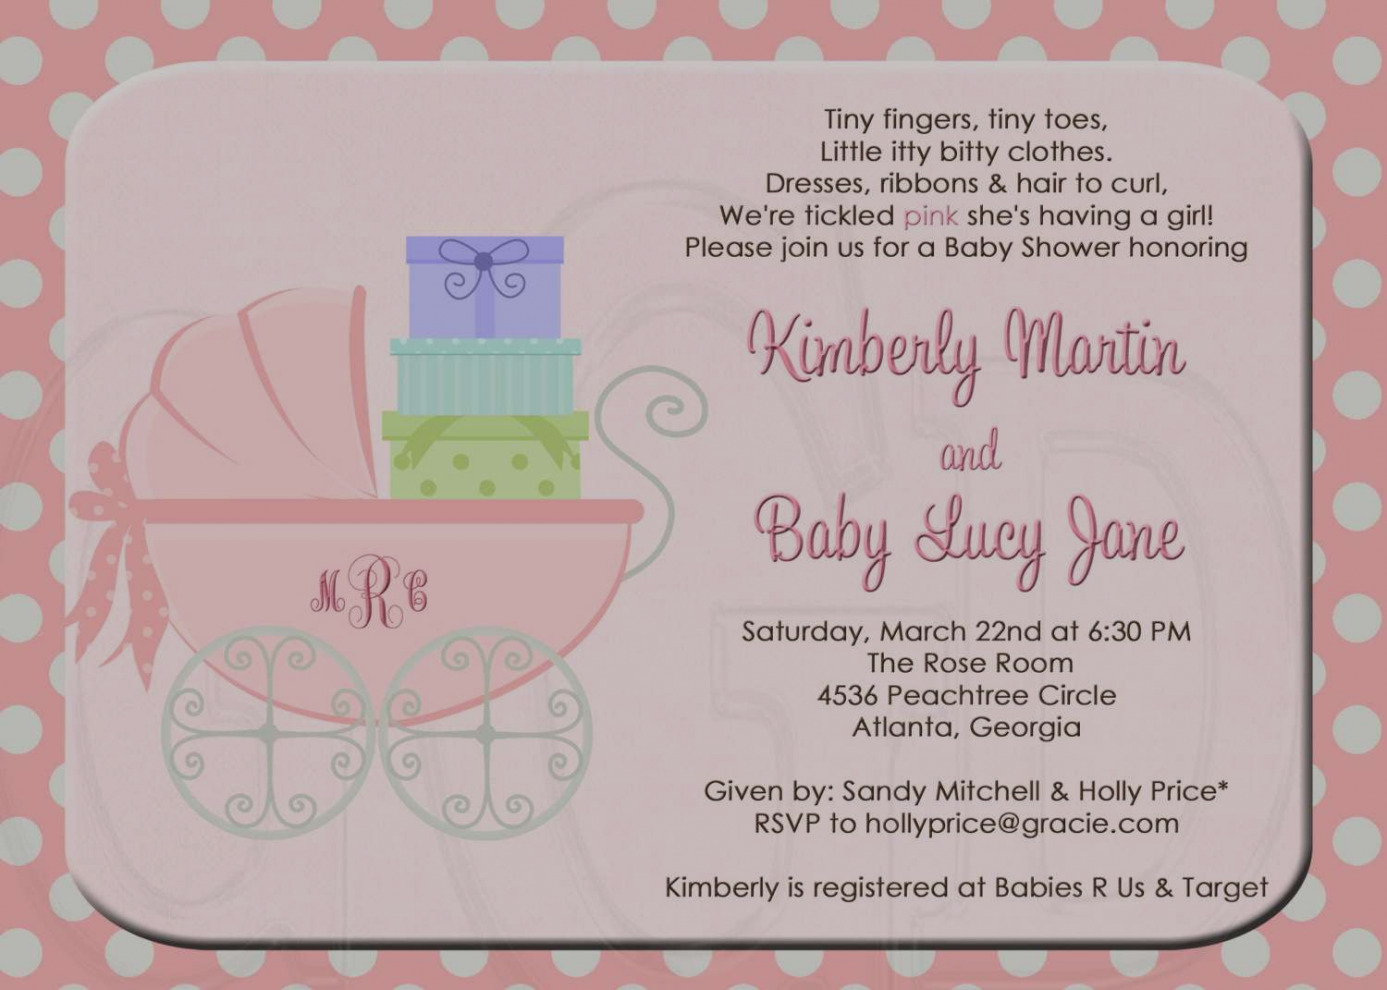 Full Size of Baby Shower:delightful Baby Shower Invitation Wording Picture Designs Baby Shower Invitation Wording Throwing A Baby Shower Baby Shower Hostess Gifts Evite Baby Shower Baby Shower Stationary How To Plan A Baby Shower Baby Shower At The Park